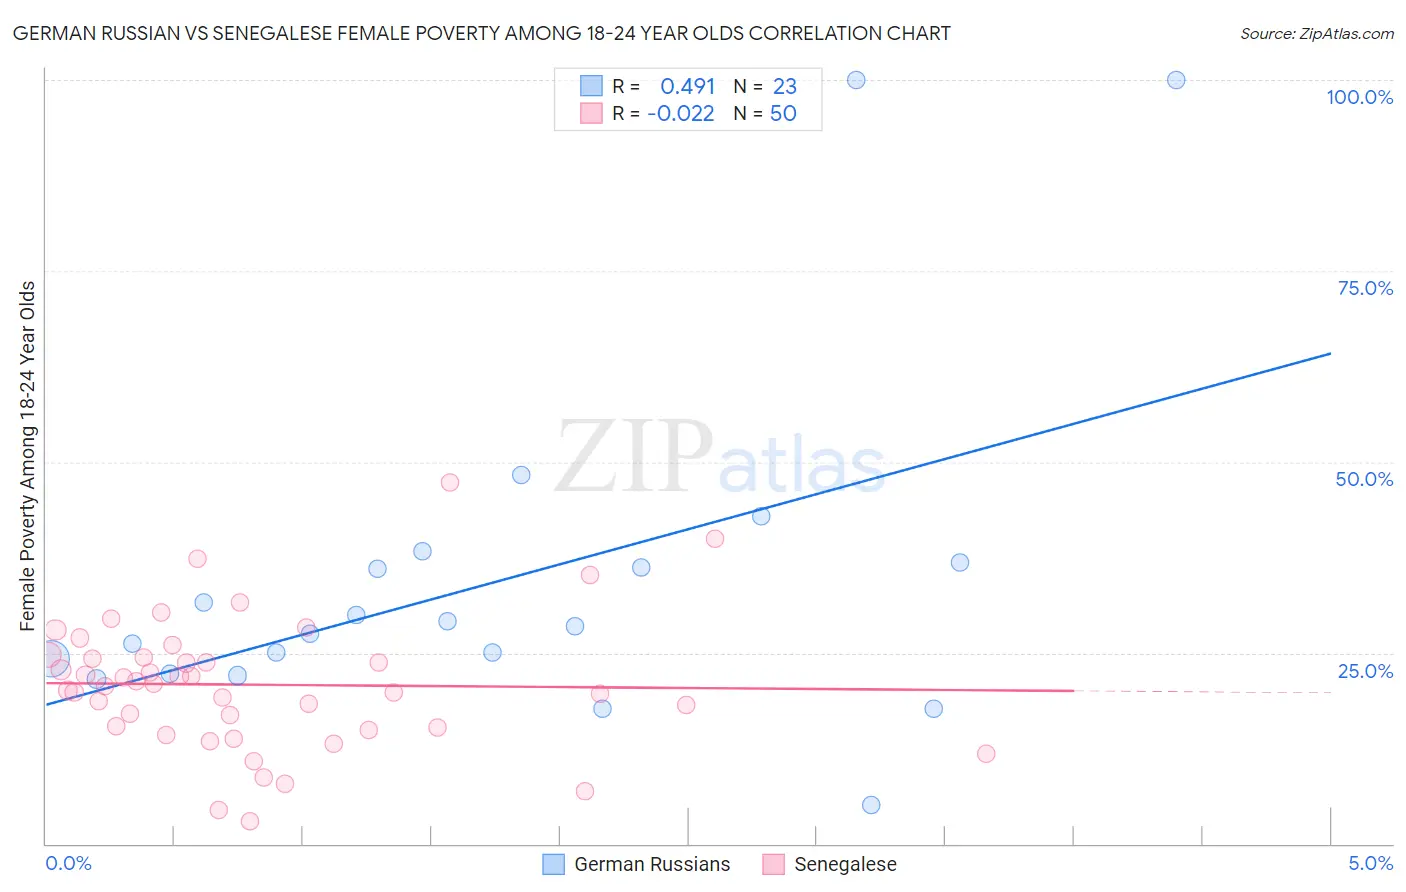 German Russian vs Senegalese Female Poverty Among 18-24 Year Olds